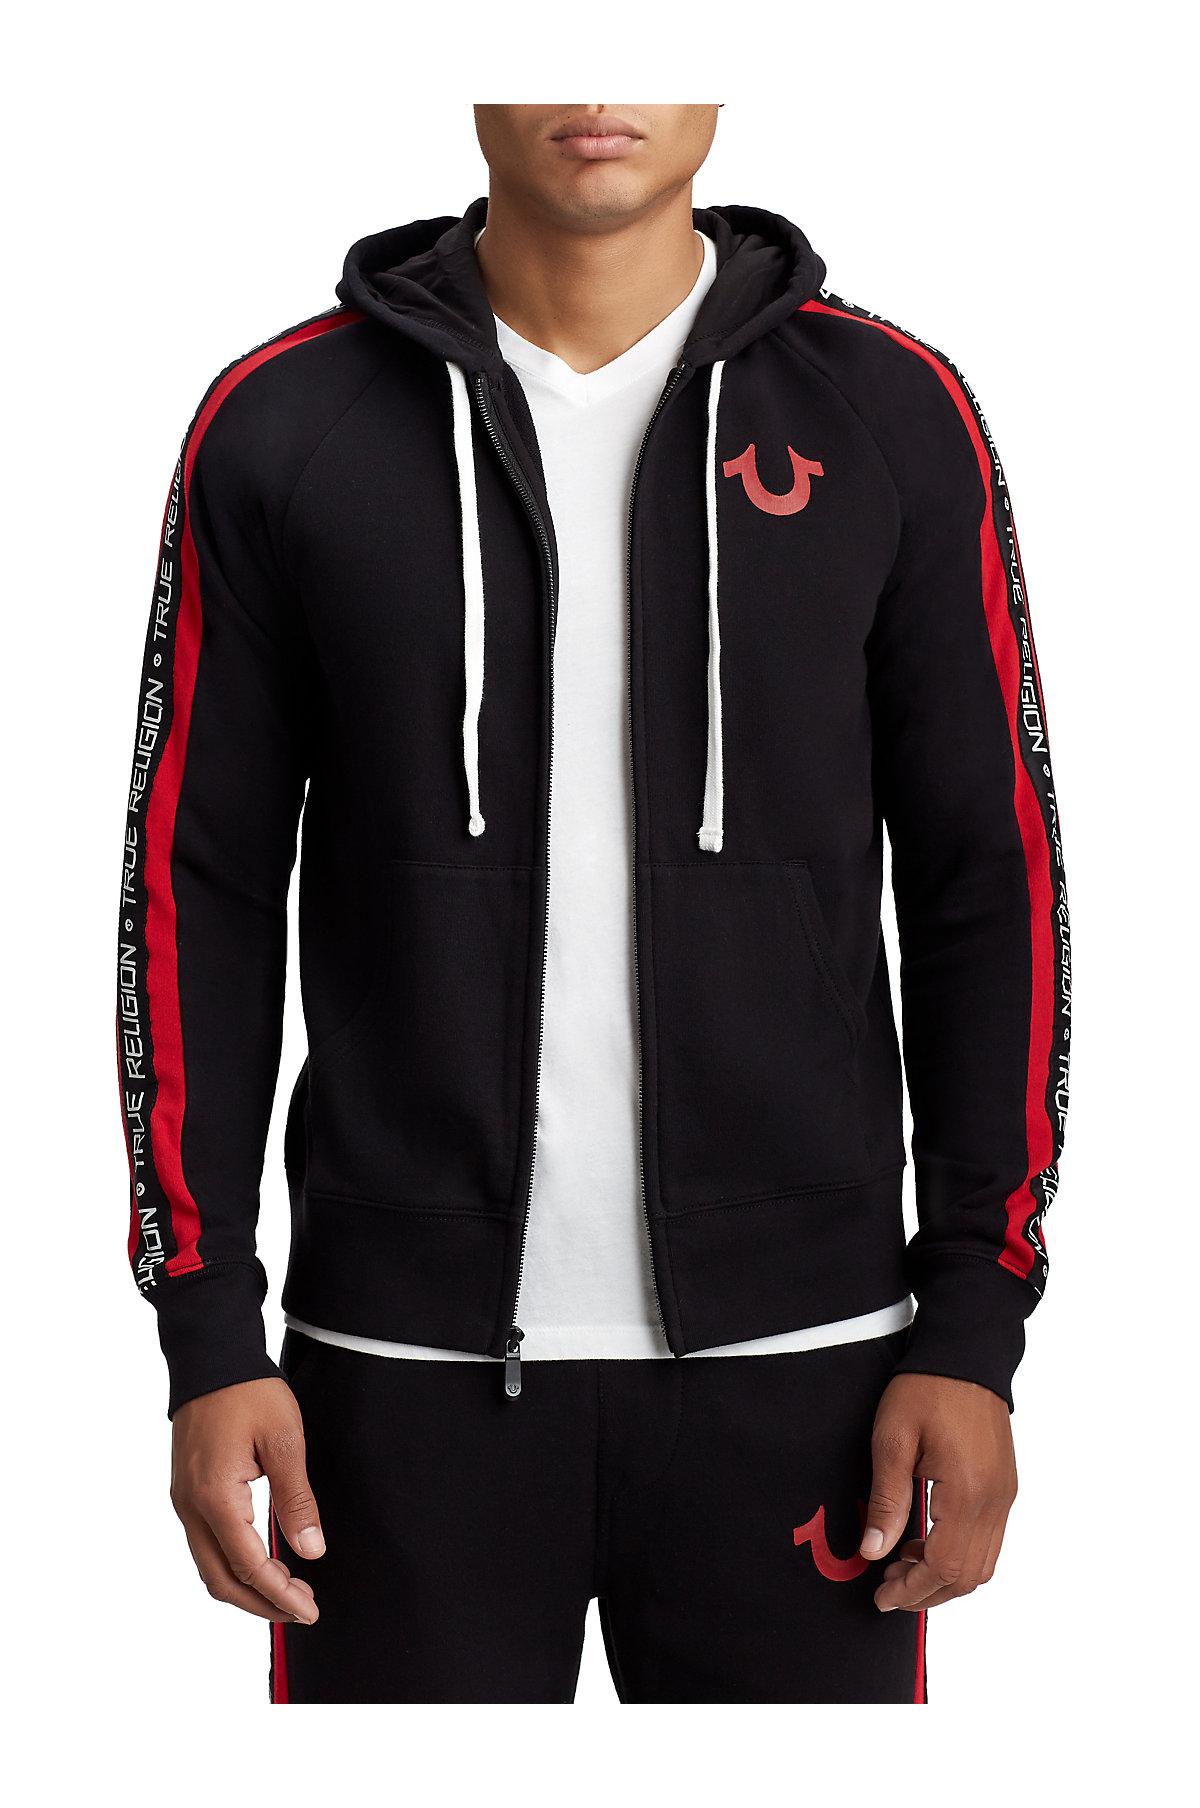 true religion black and red hoodie